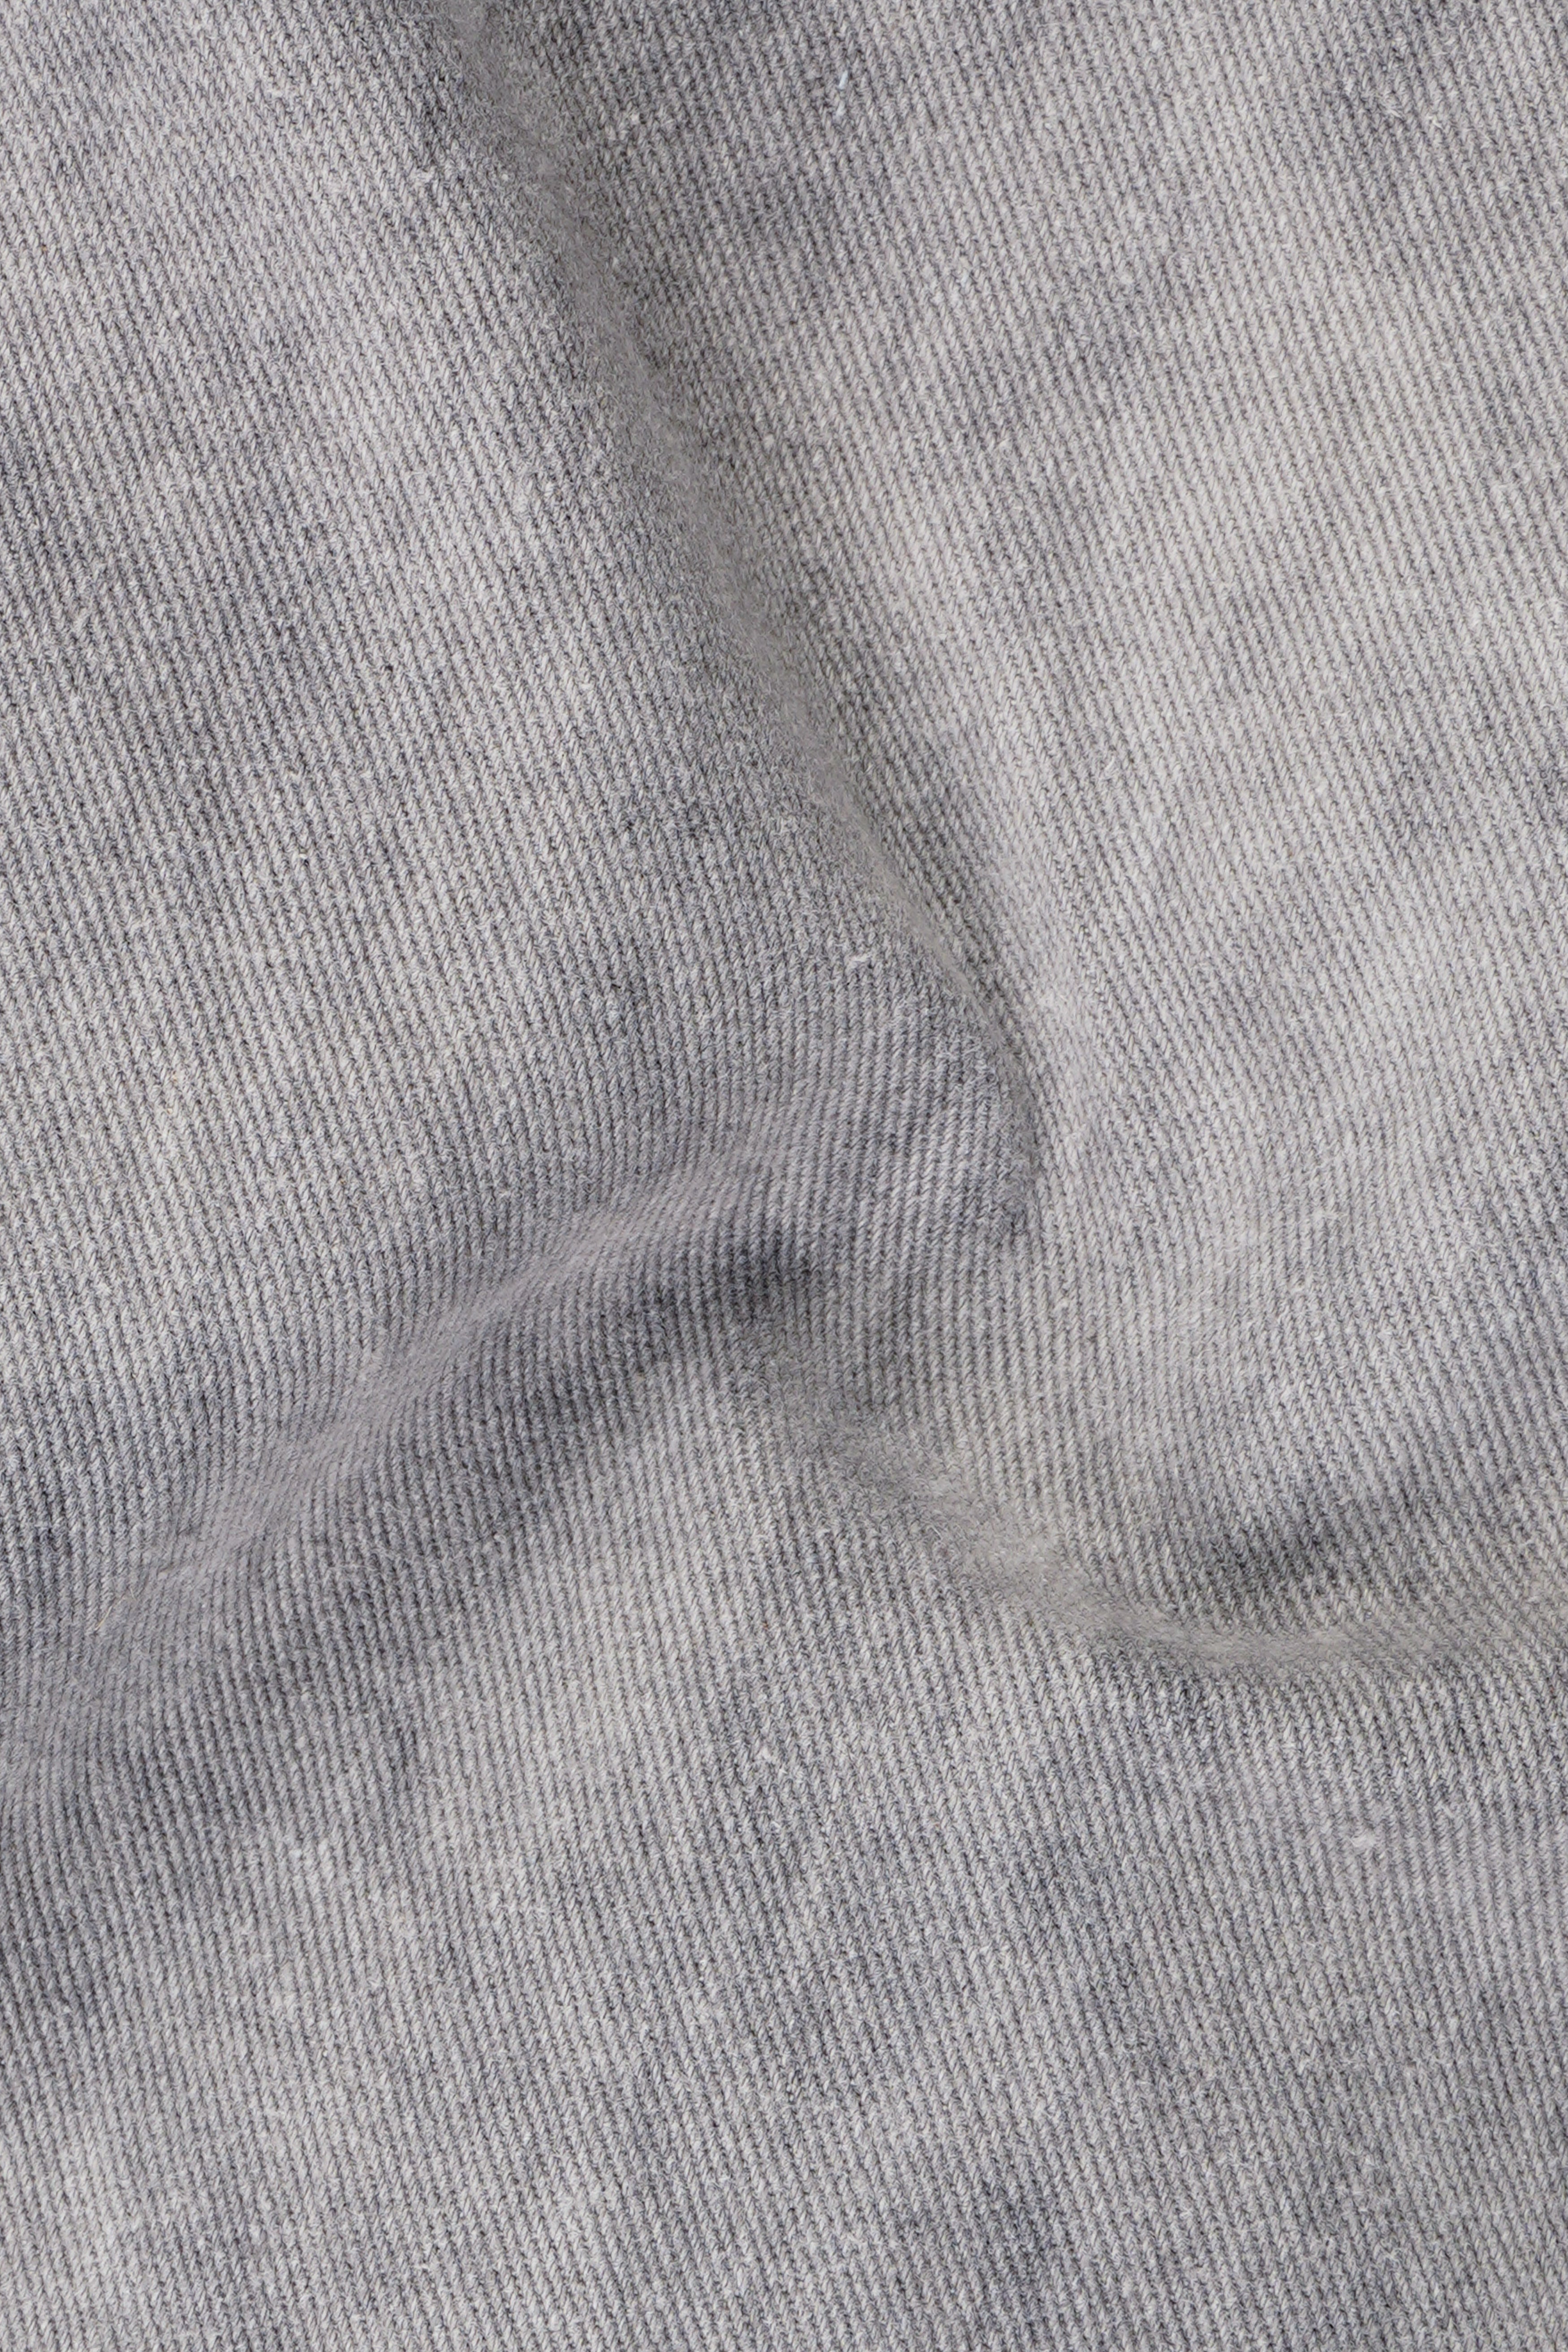 Martini Gray Whickering Washed Stretchable Denim